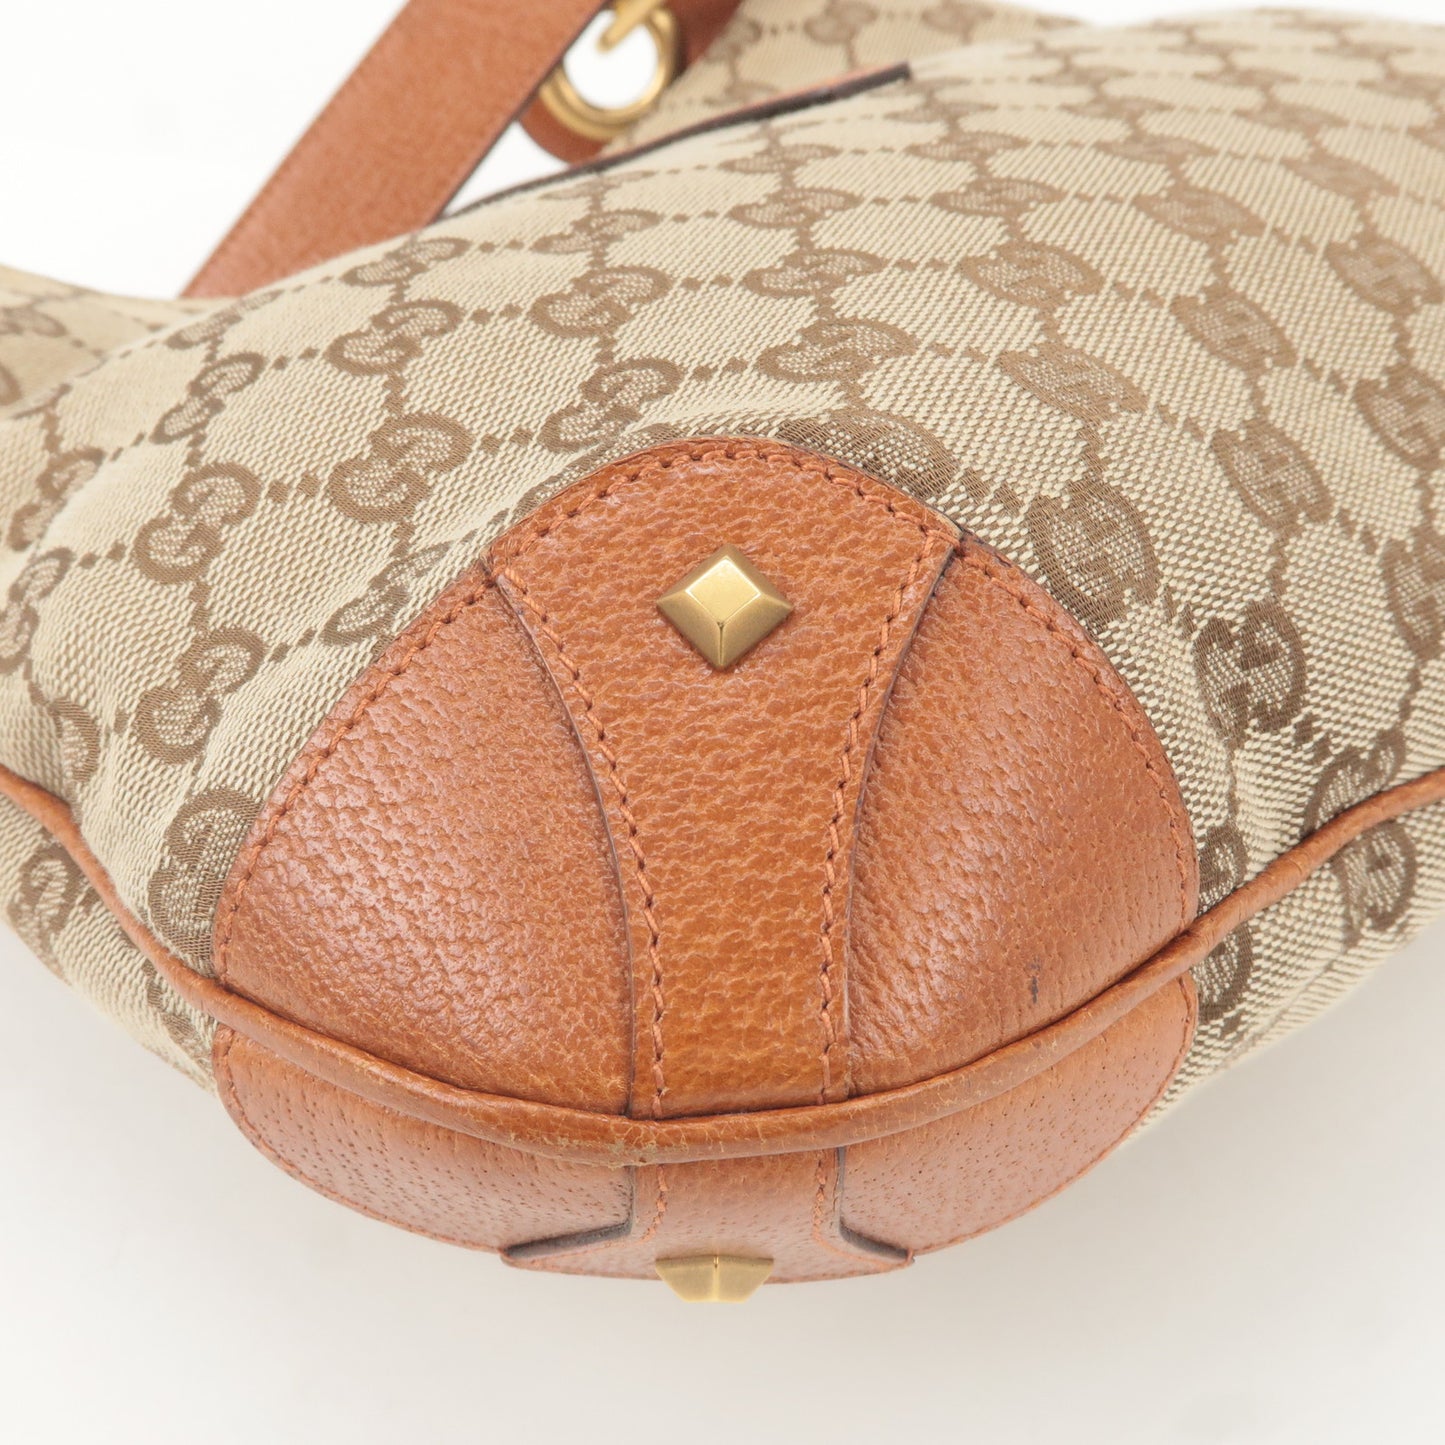 GUCCI New Jackie GG Canvas Leather Shoulder Bag Brown 120888